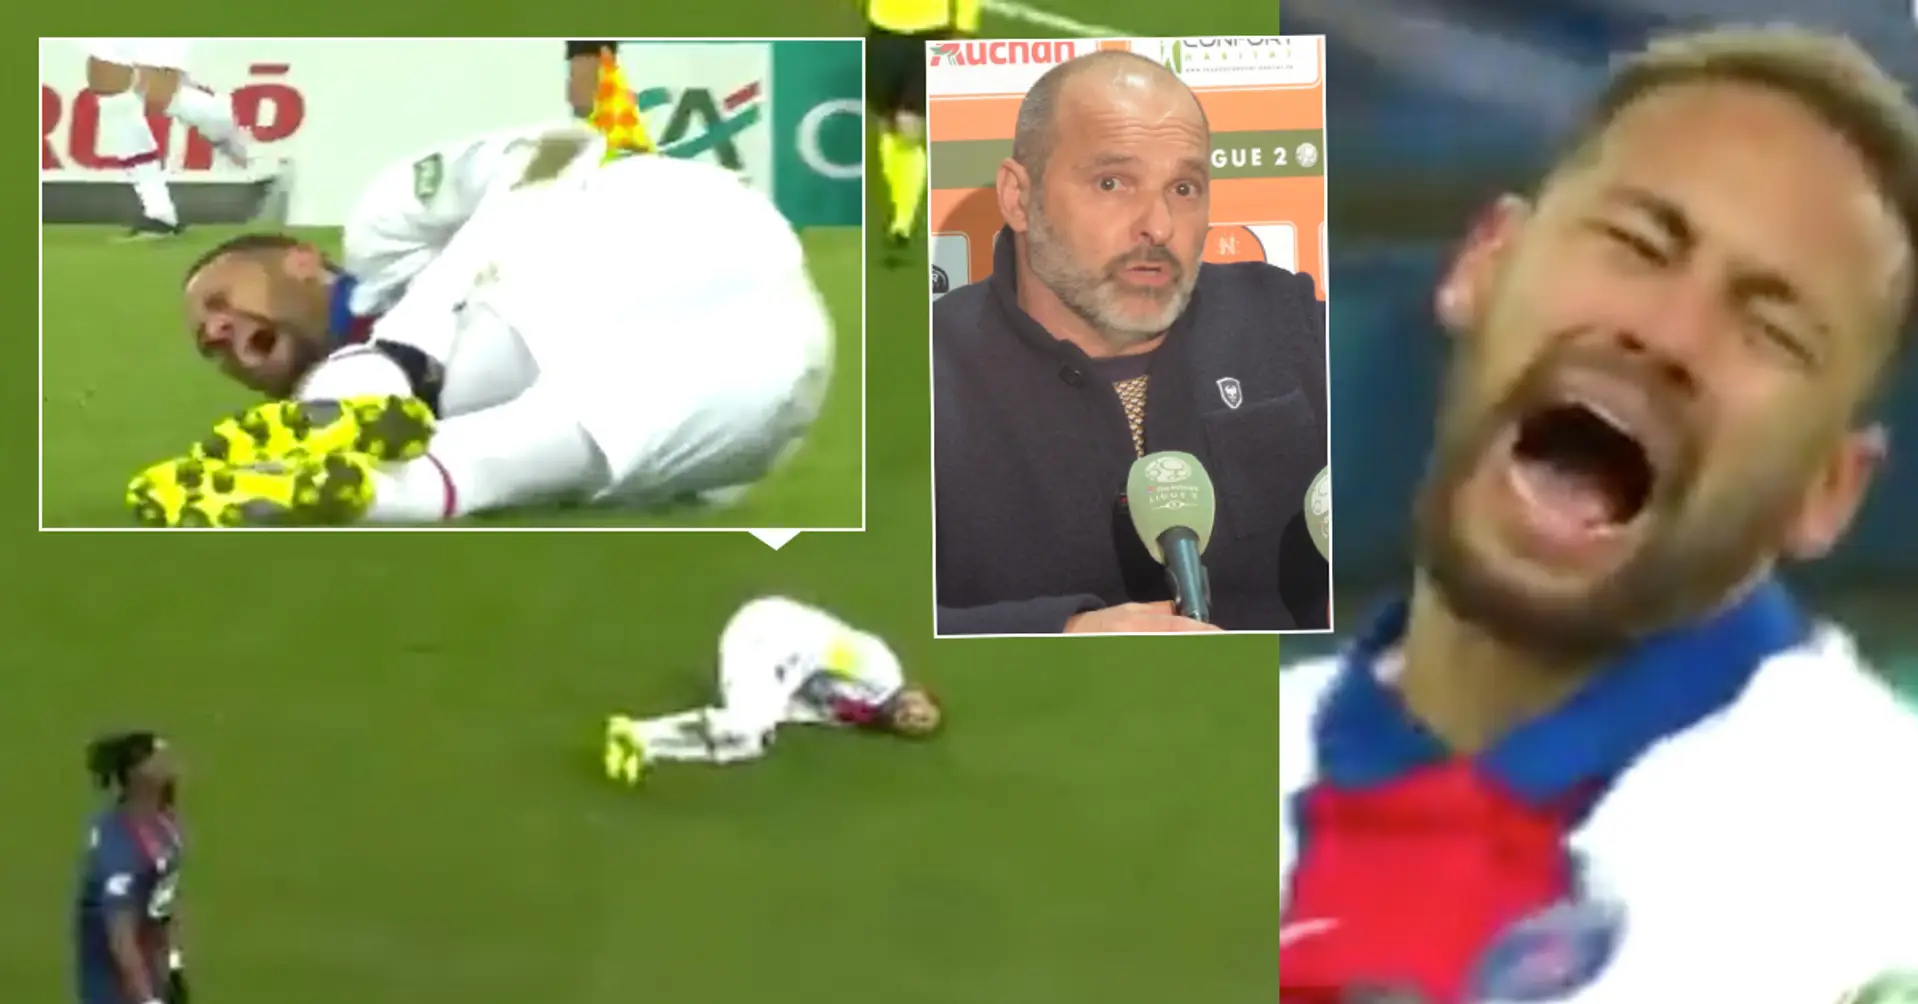 Neymar left in agony after suffering injury - Caen coach replies, 'I'm not crying, I'll leave it to Neymar'